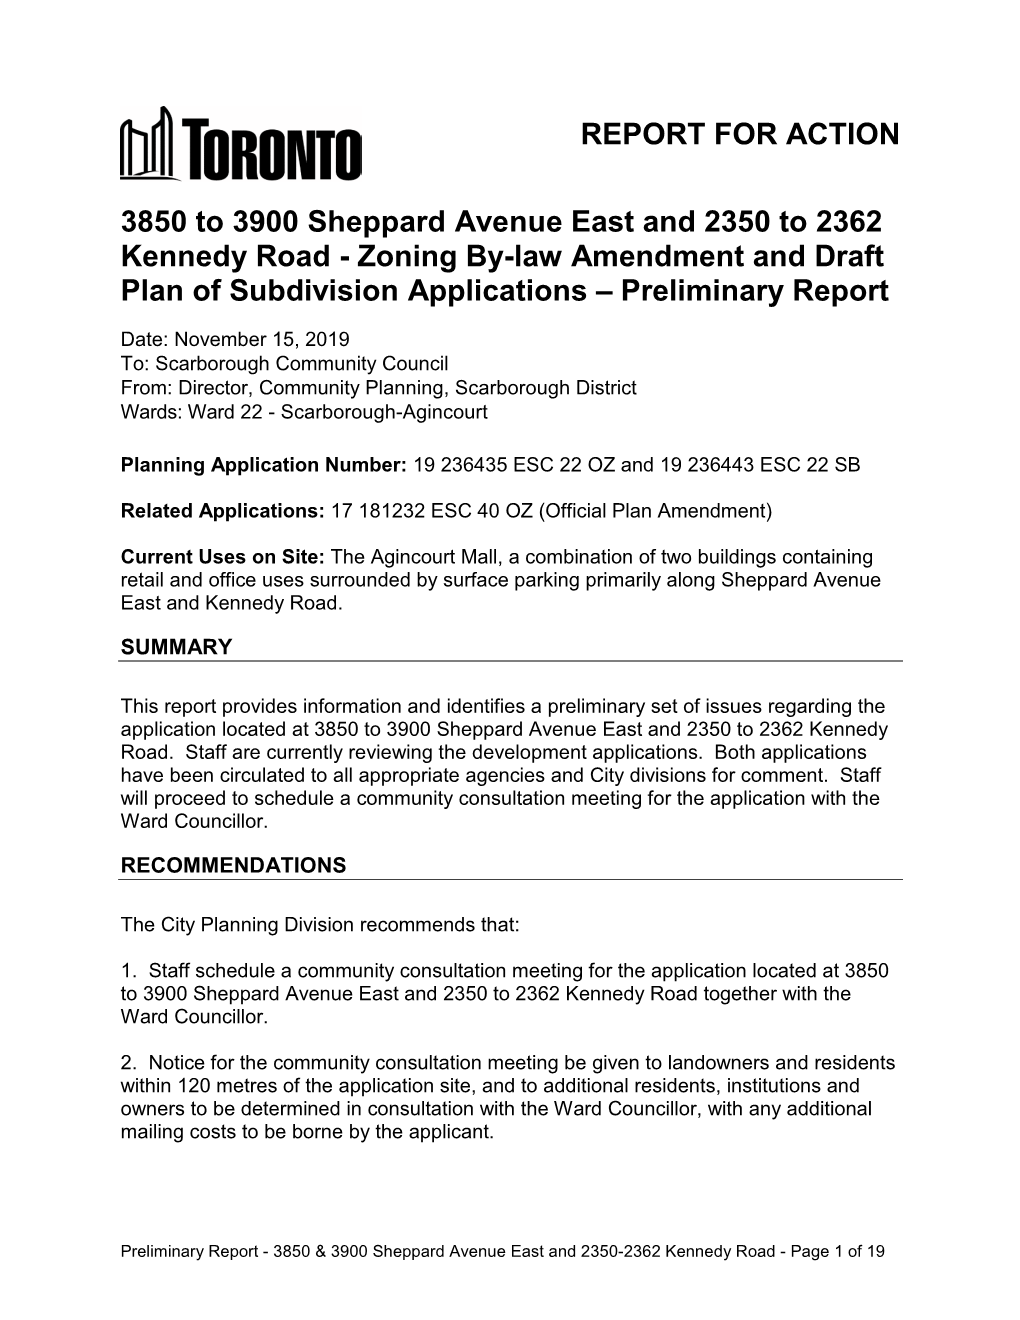 3850 to 3900 Sheppard Avenue East and 2350 to 2362 Kennedy Road - Zoning By-Law Amendment and Draft Plan of Subdivision Applications – Preliminary Report